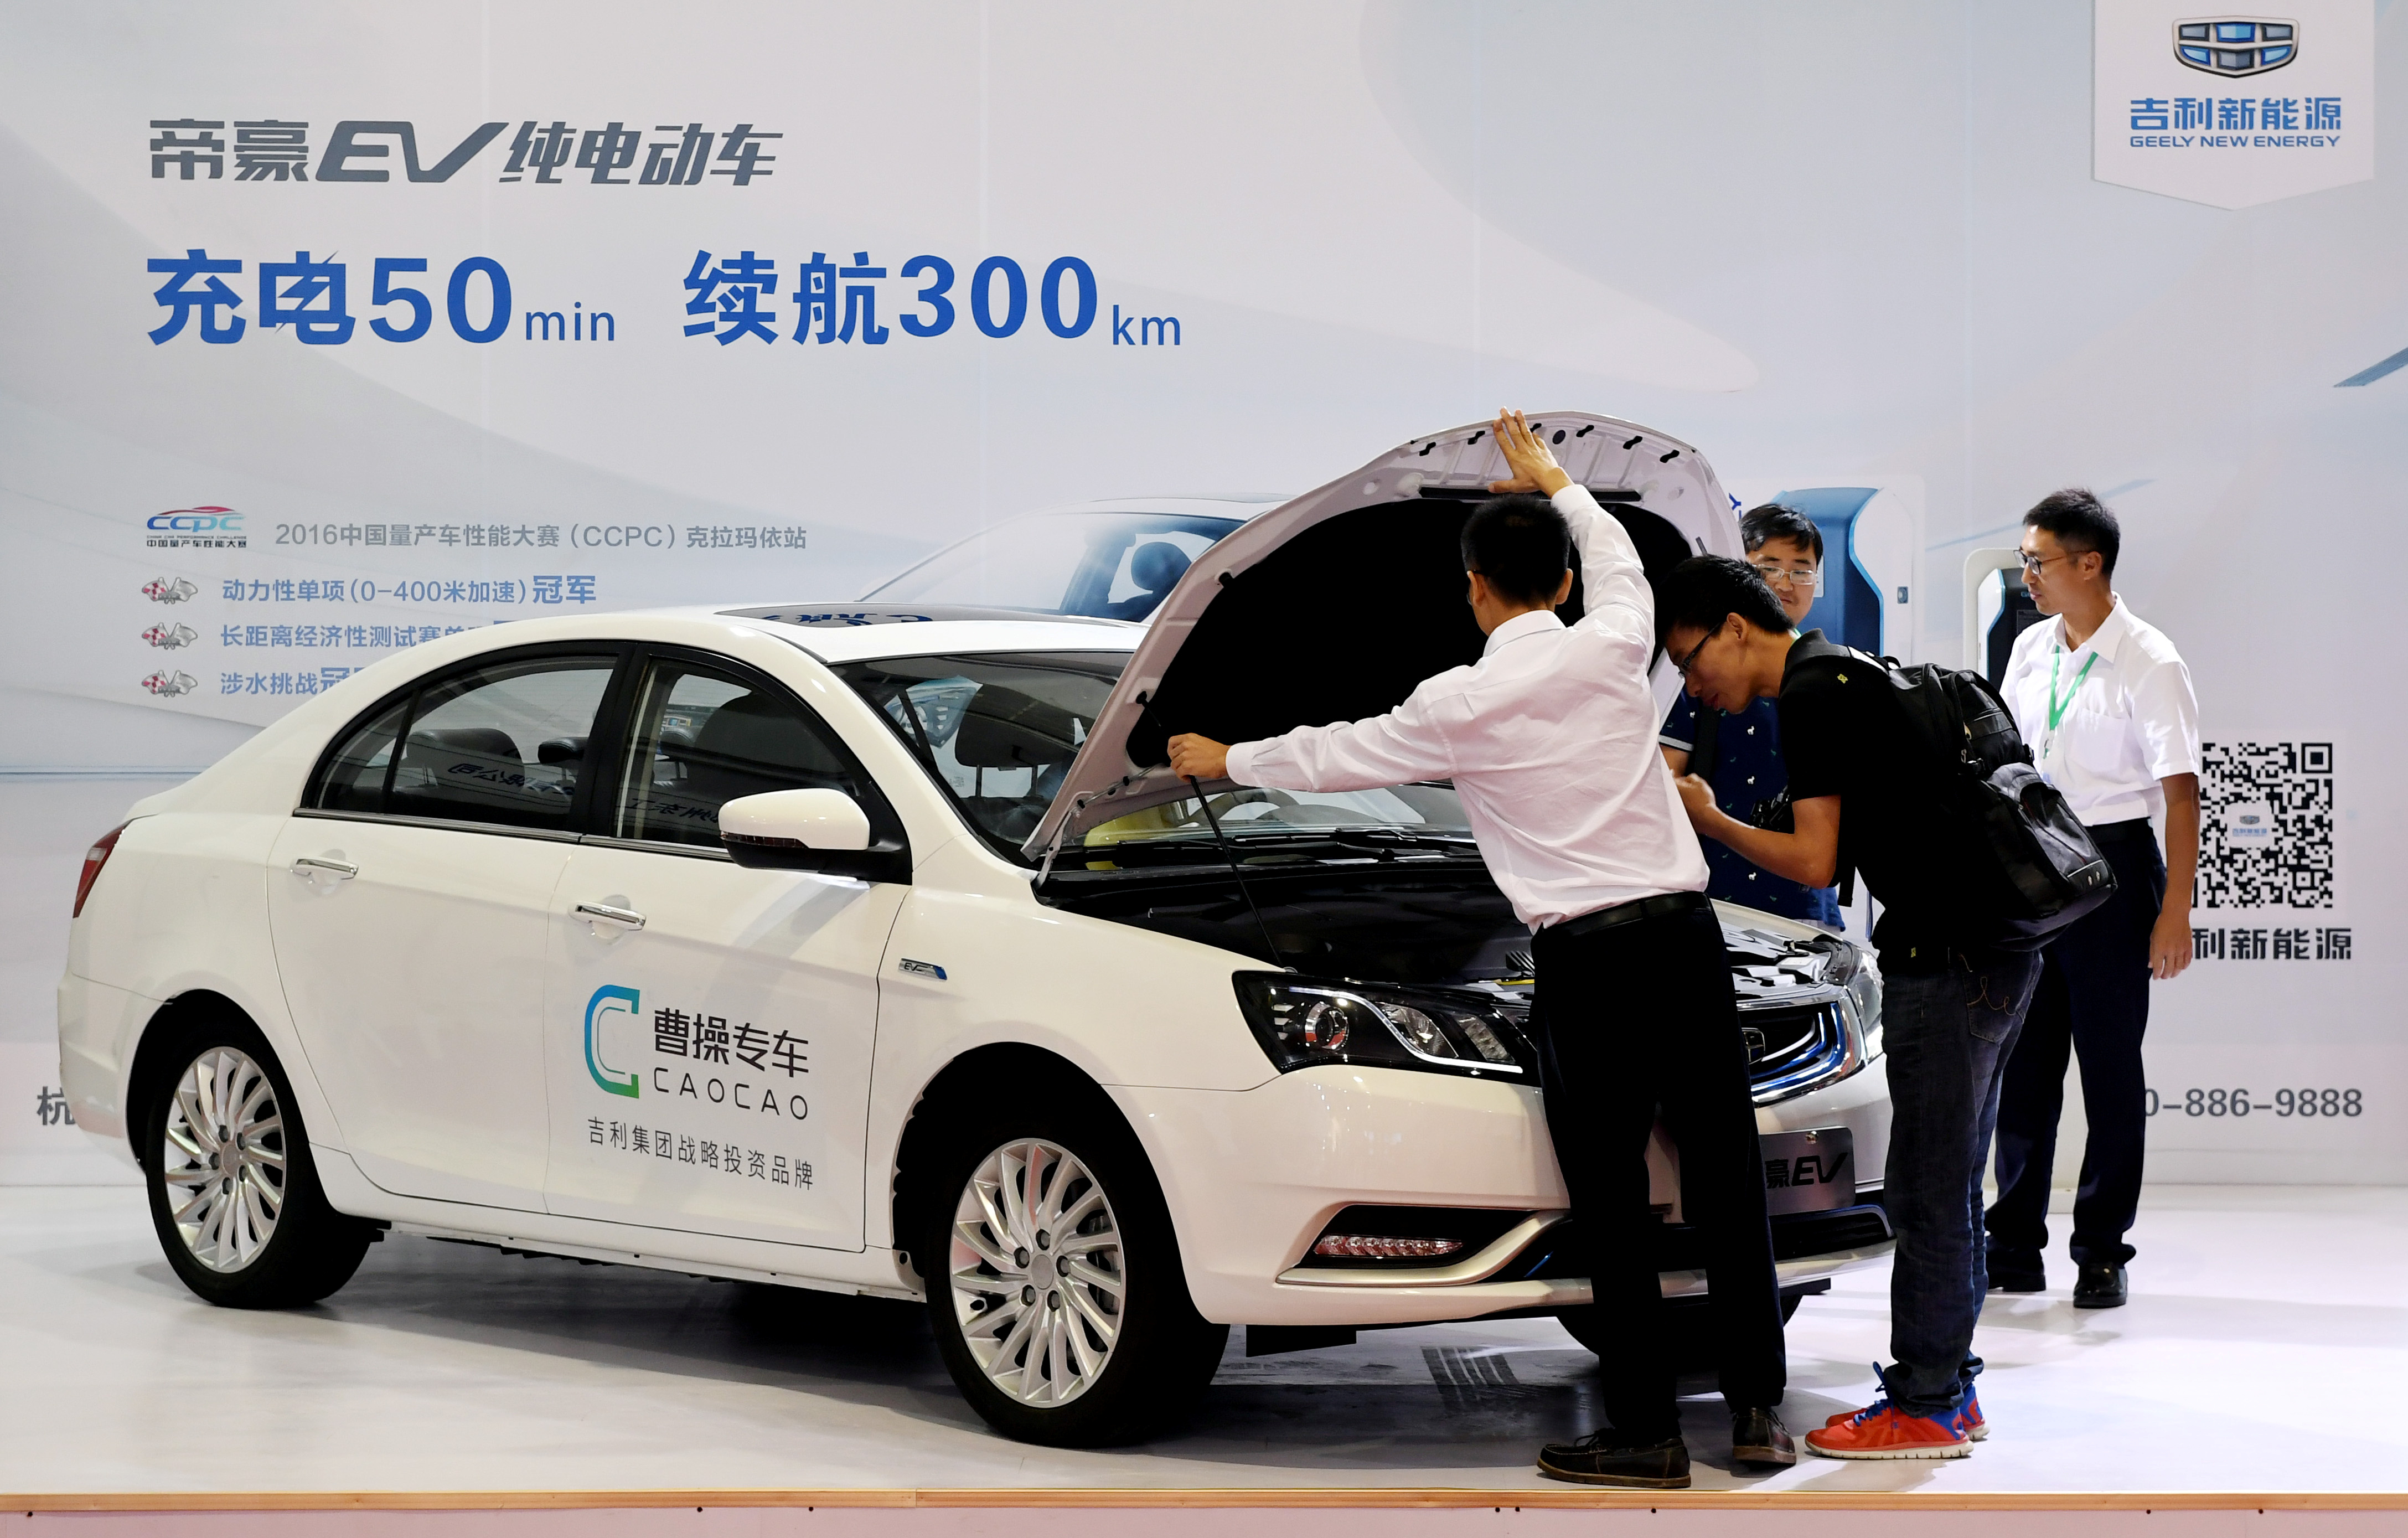 Men look at an electric vehicle of Caocao Zhuanche at a new energy vehicle (NEV) trade fair in Zhengzhou